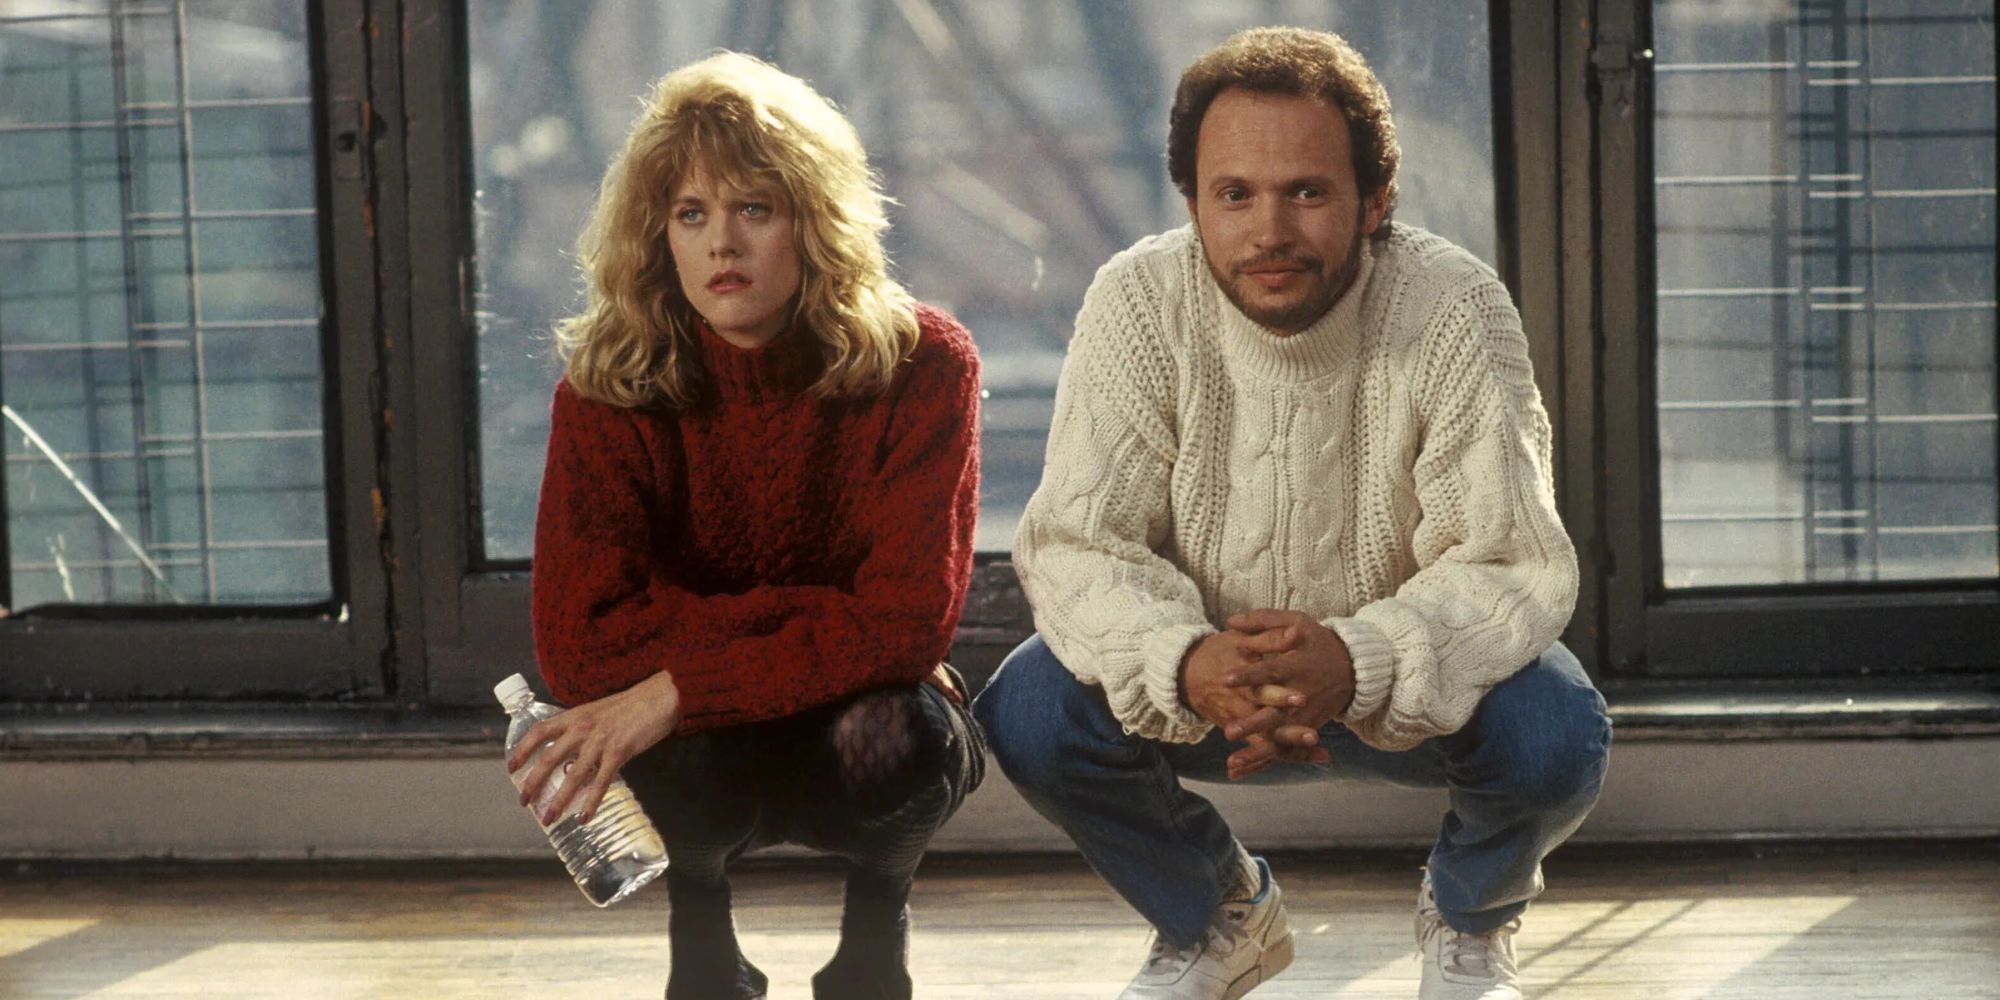 Meg Ryan in a red sweater and Billy Crystal in a white sweater crouching down in When Harry Met Sally